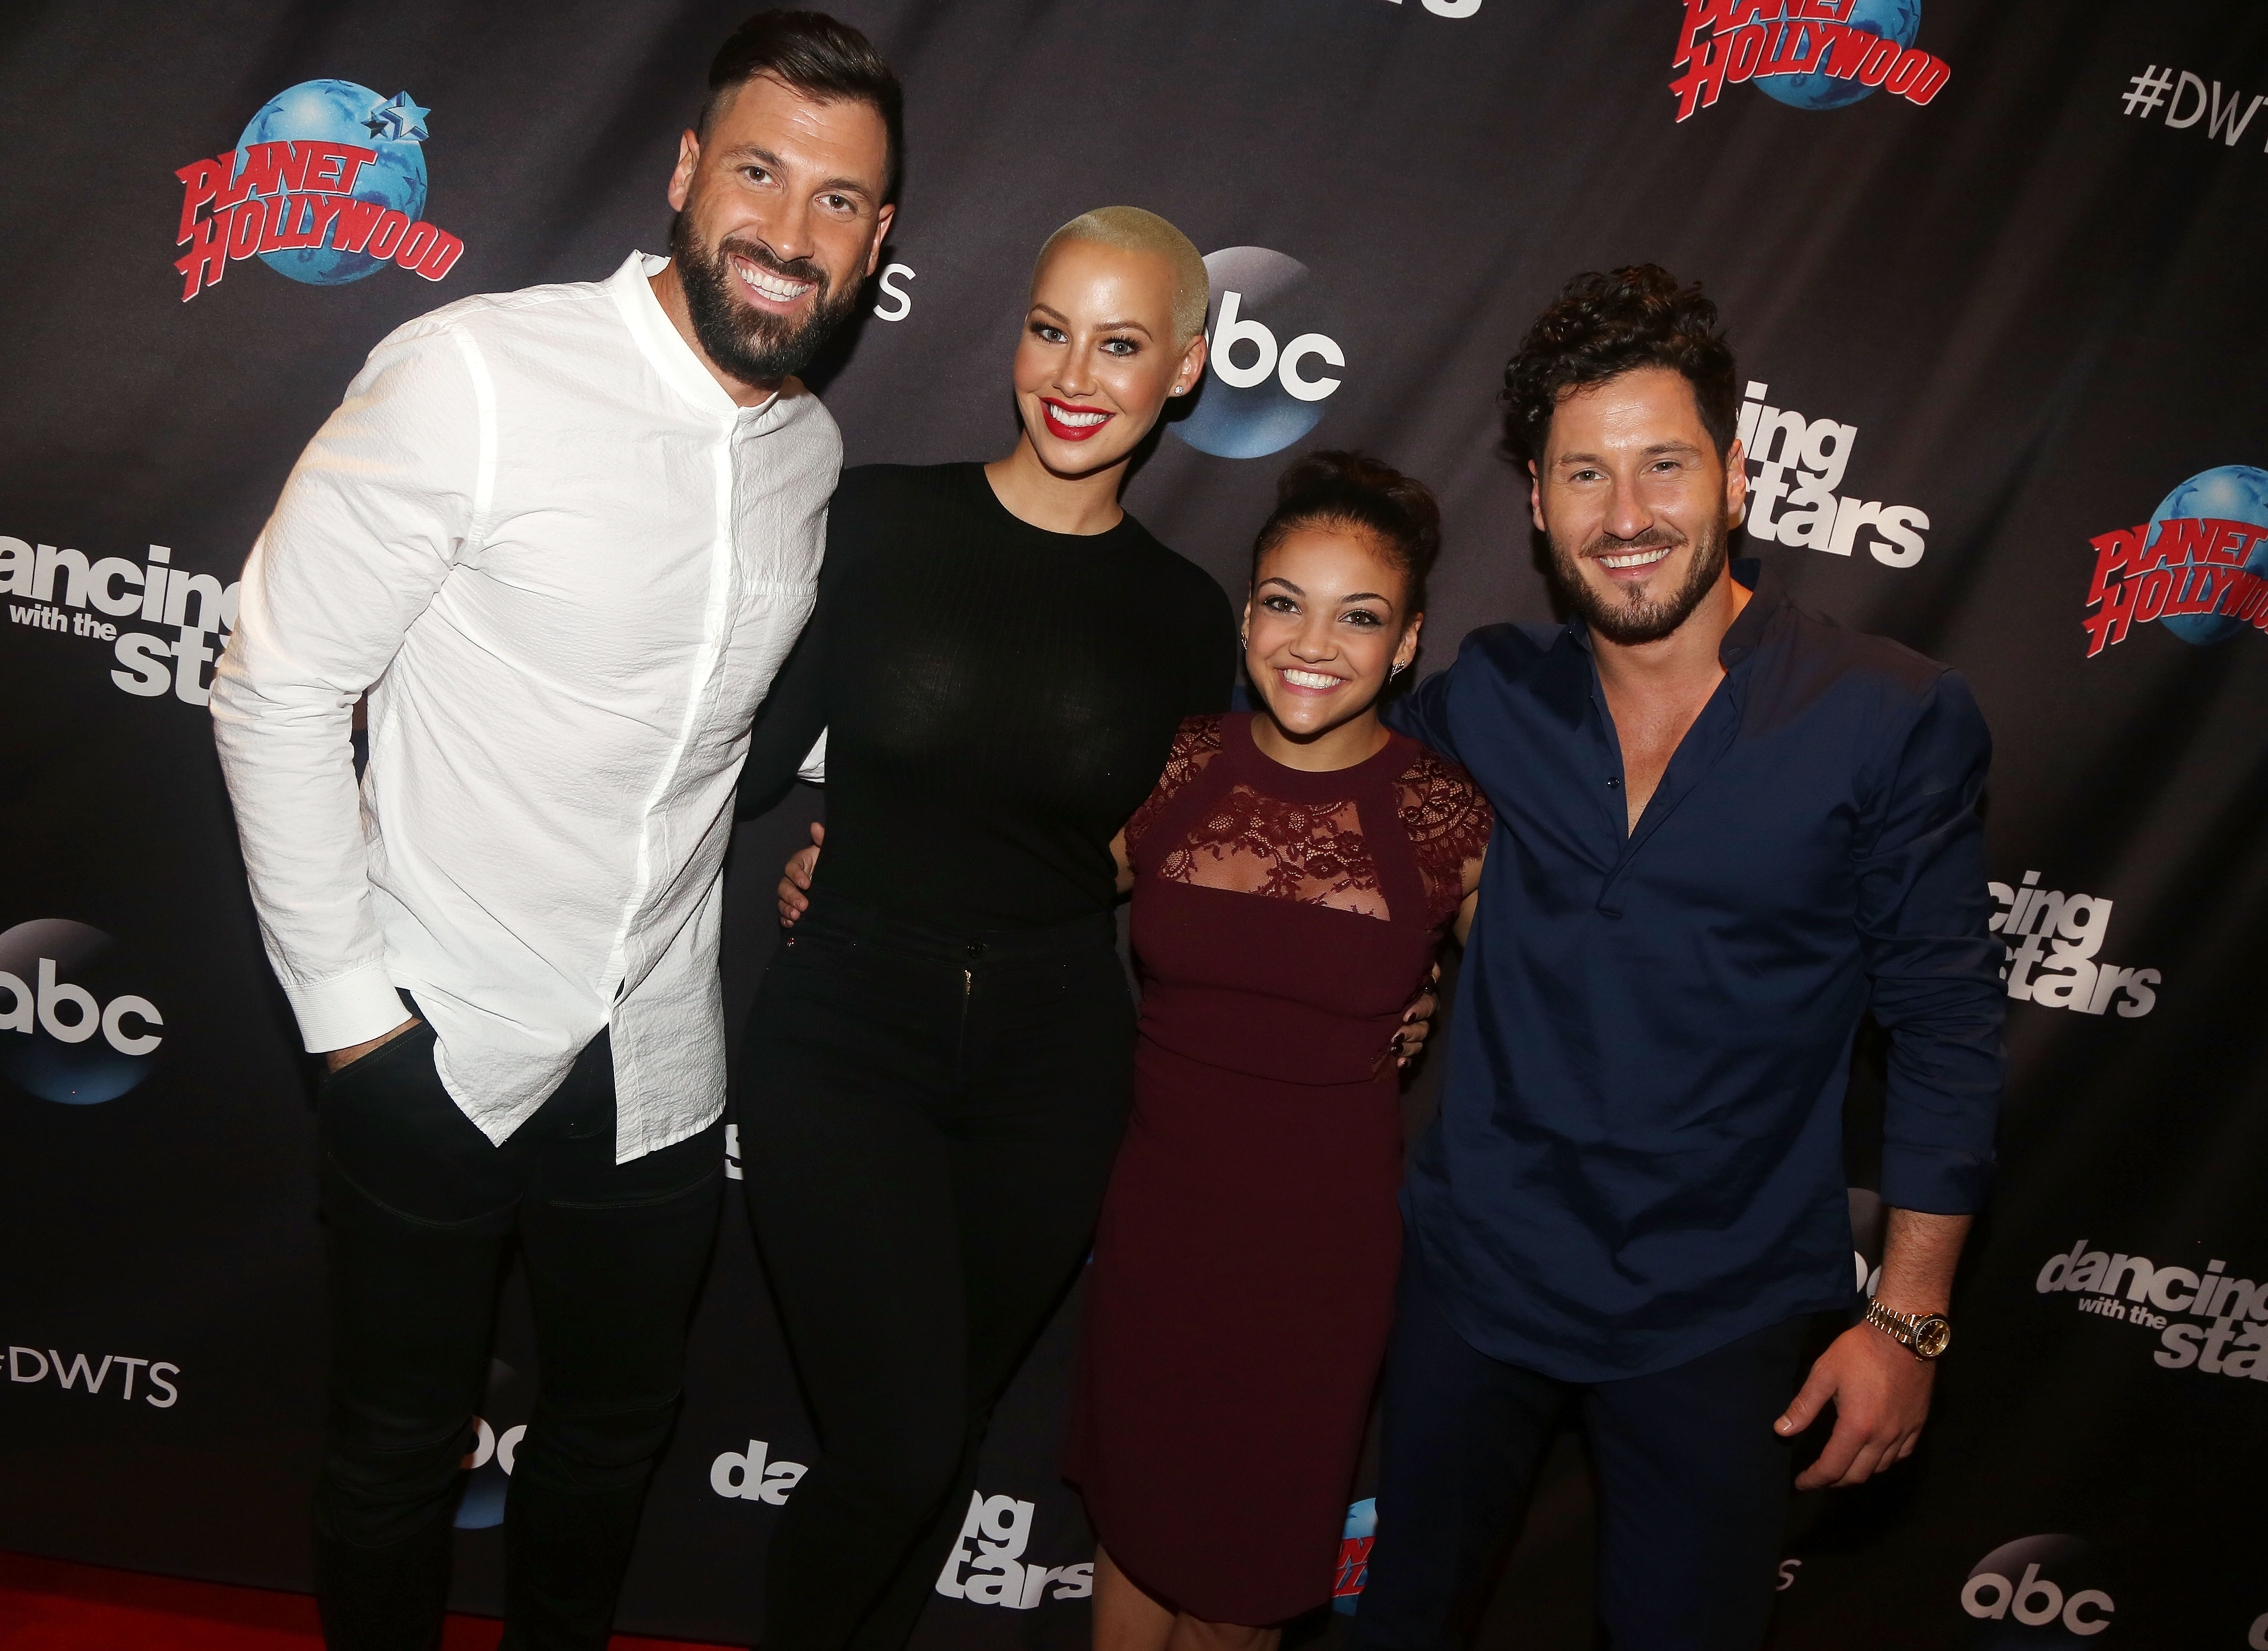 Dancing With The Stars Cast Visits Planet Hollywood